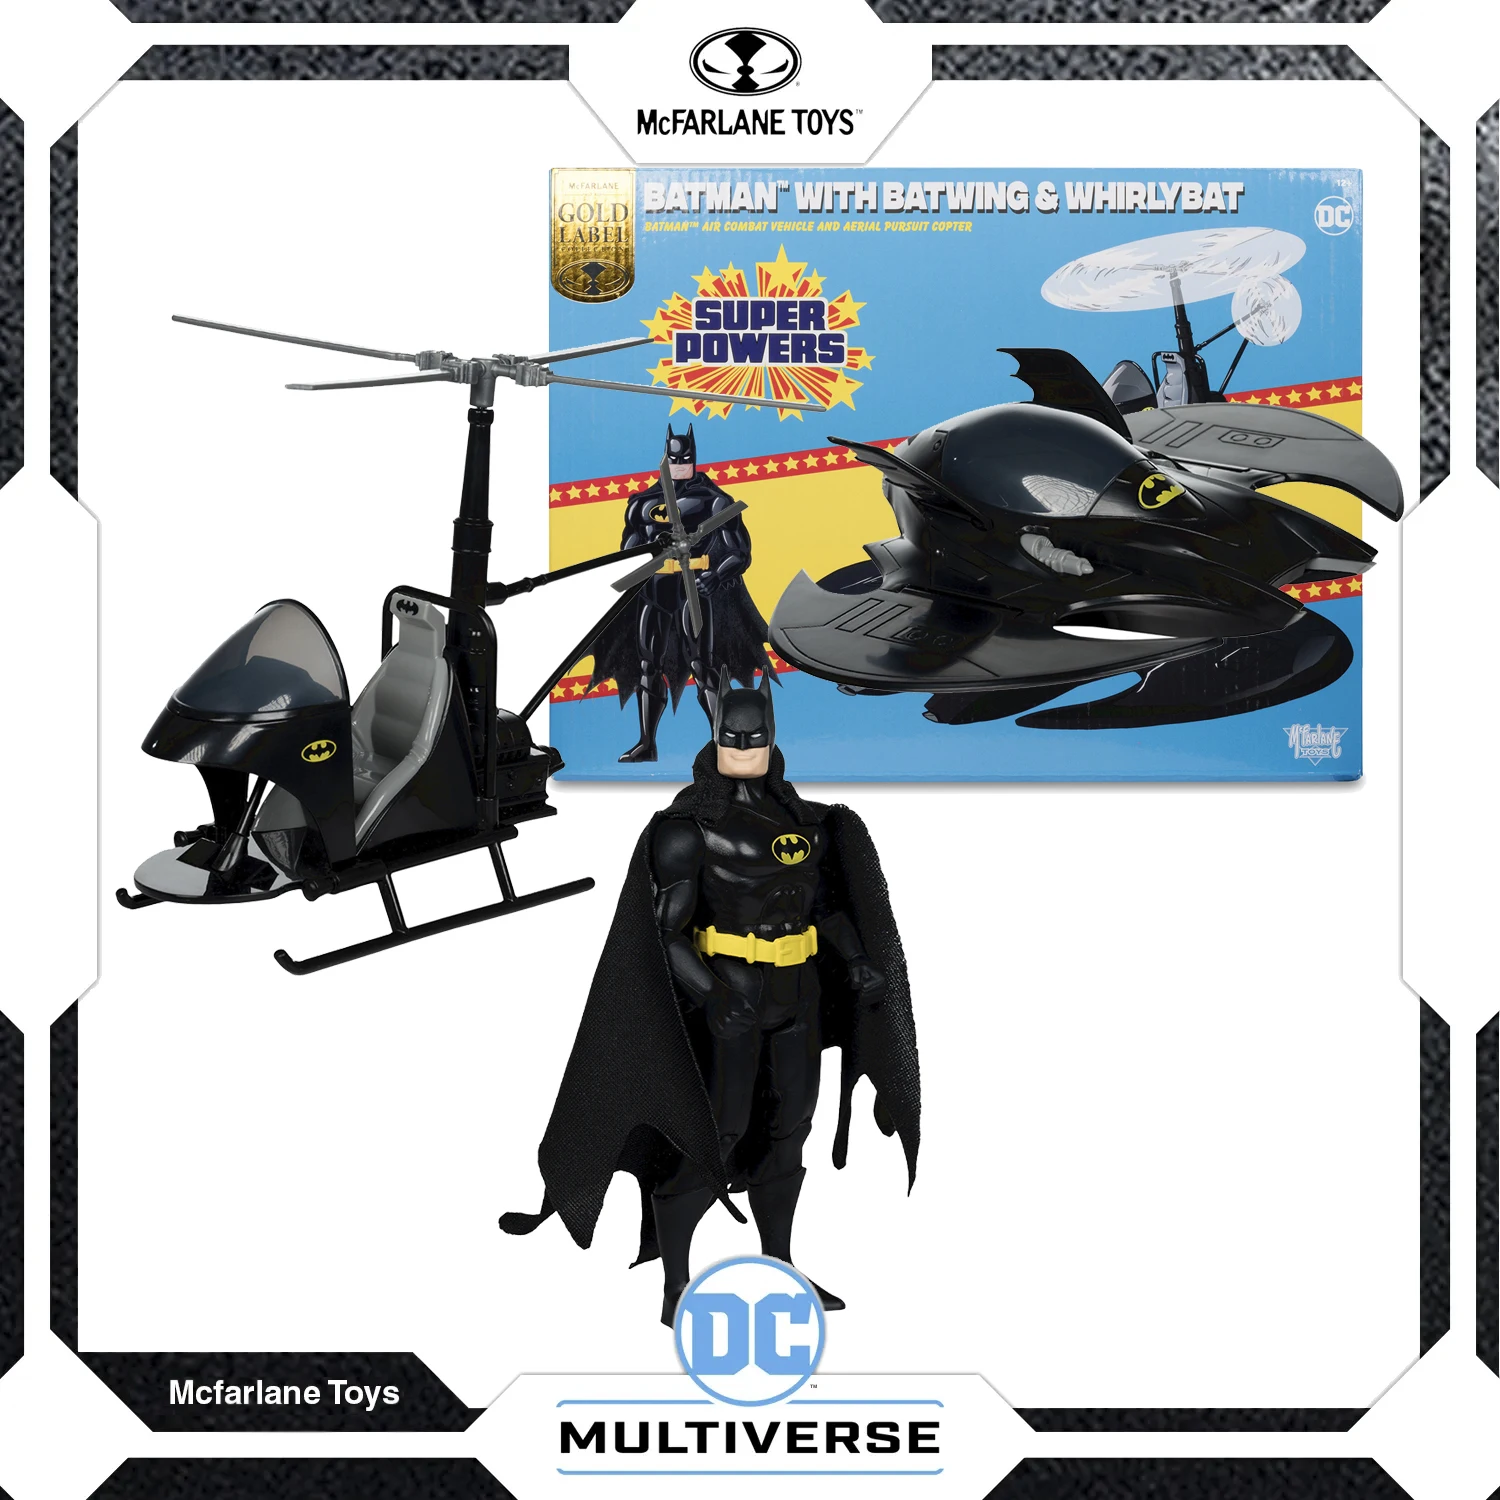 

McFarlane Toys Super Powers BATMAN WITH BATWING AND WHIRLYBAT (GOLD LABEL) 3PK DC Multiverse 4.5-Inch Movable Figure Action